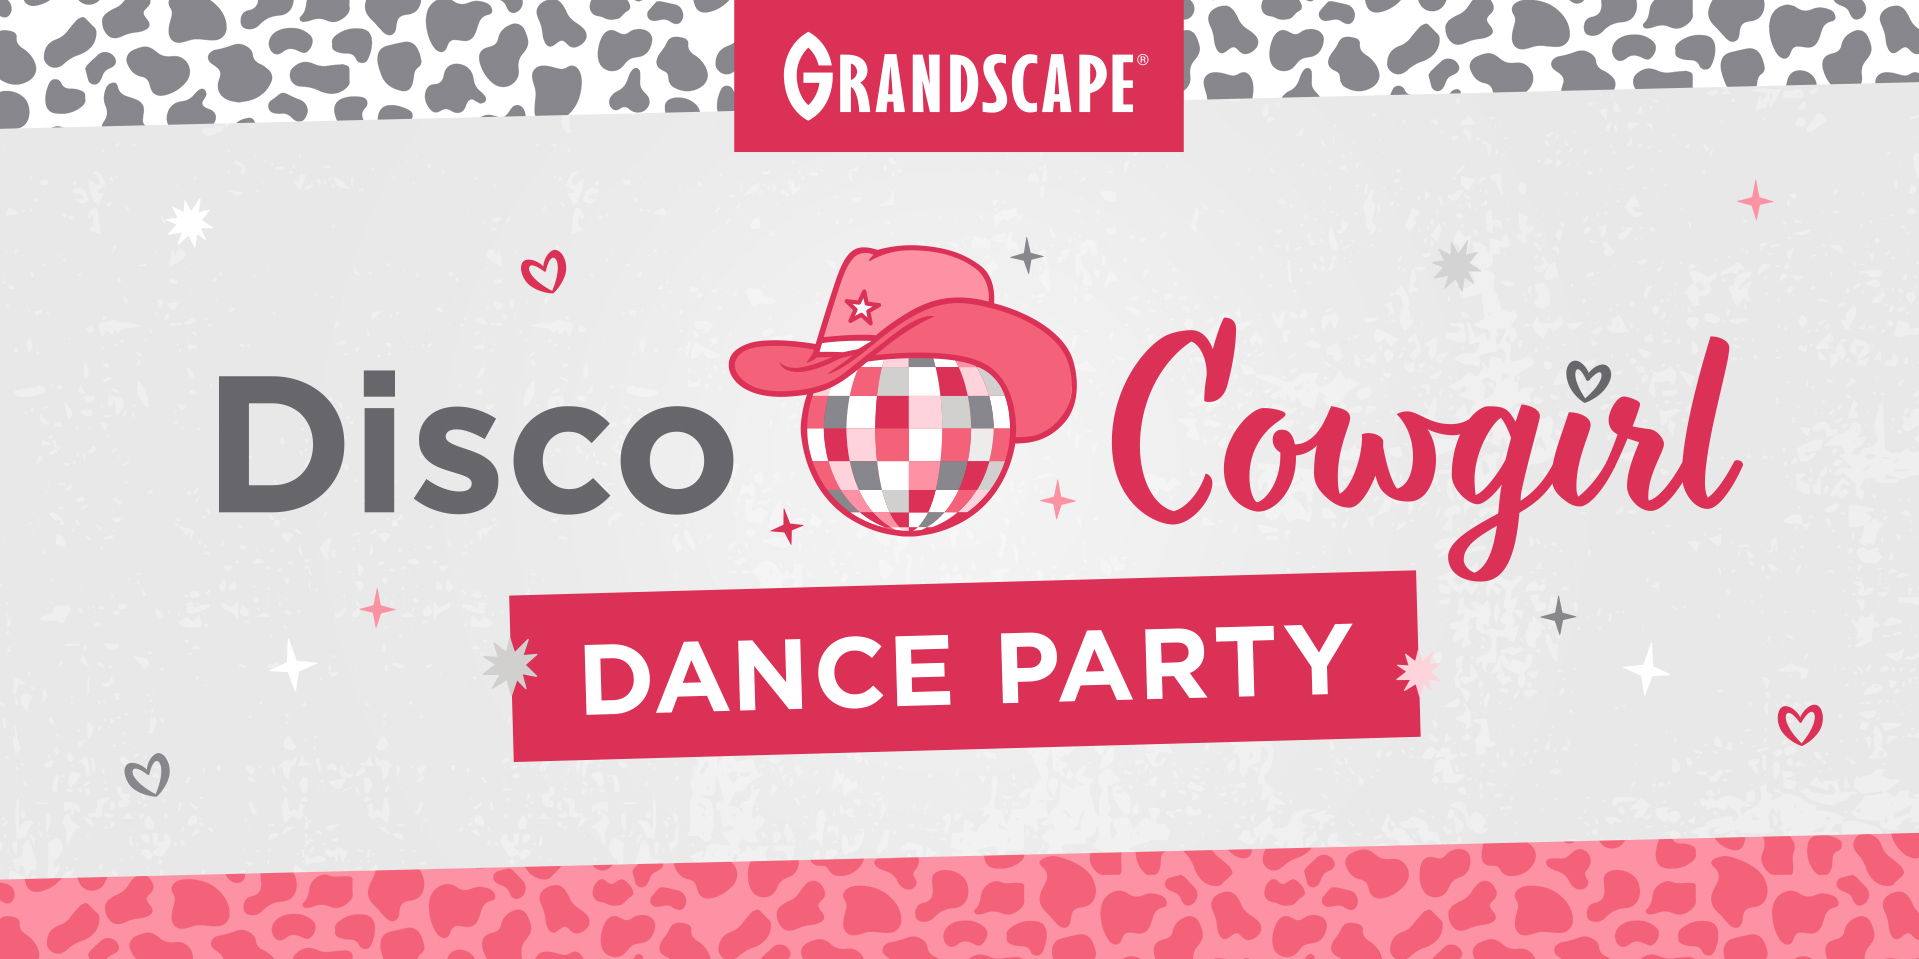 Disco Cowgirl Dance Party promotional image